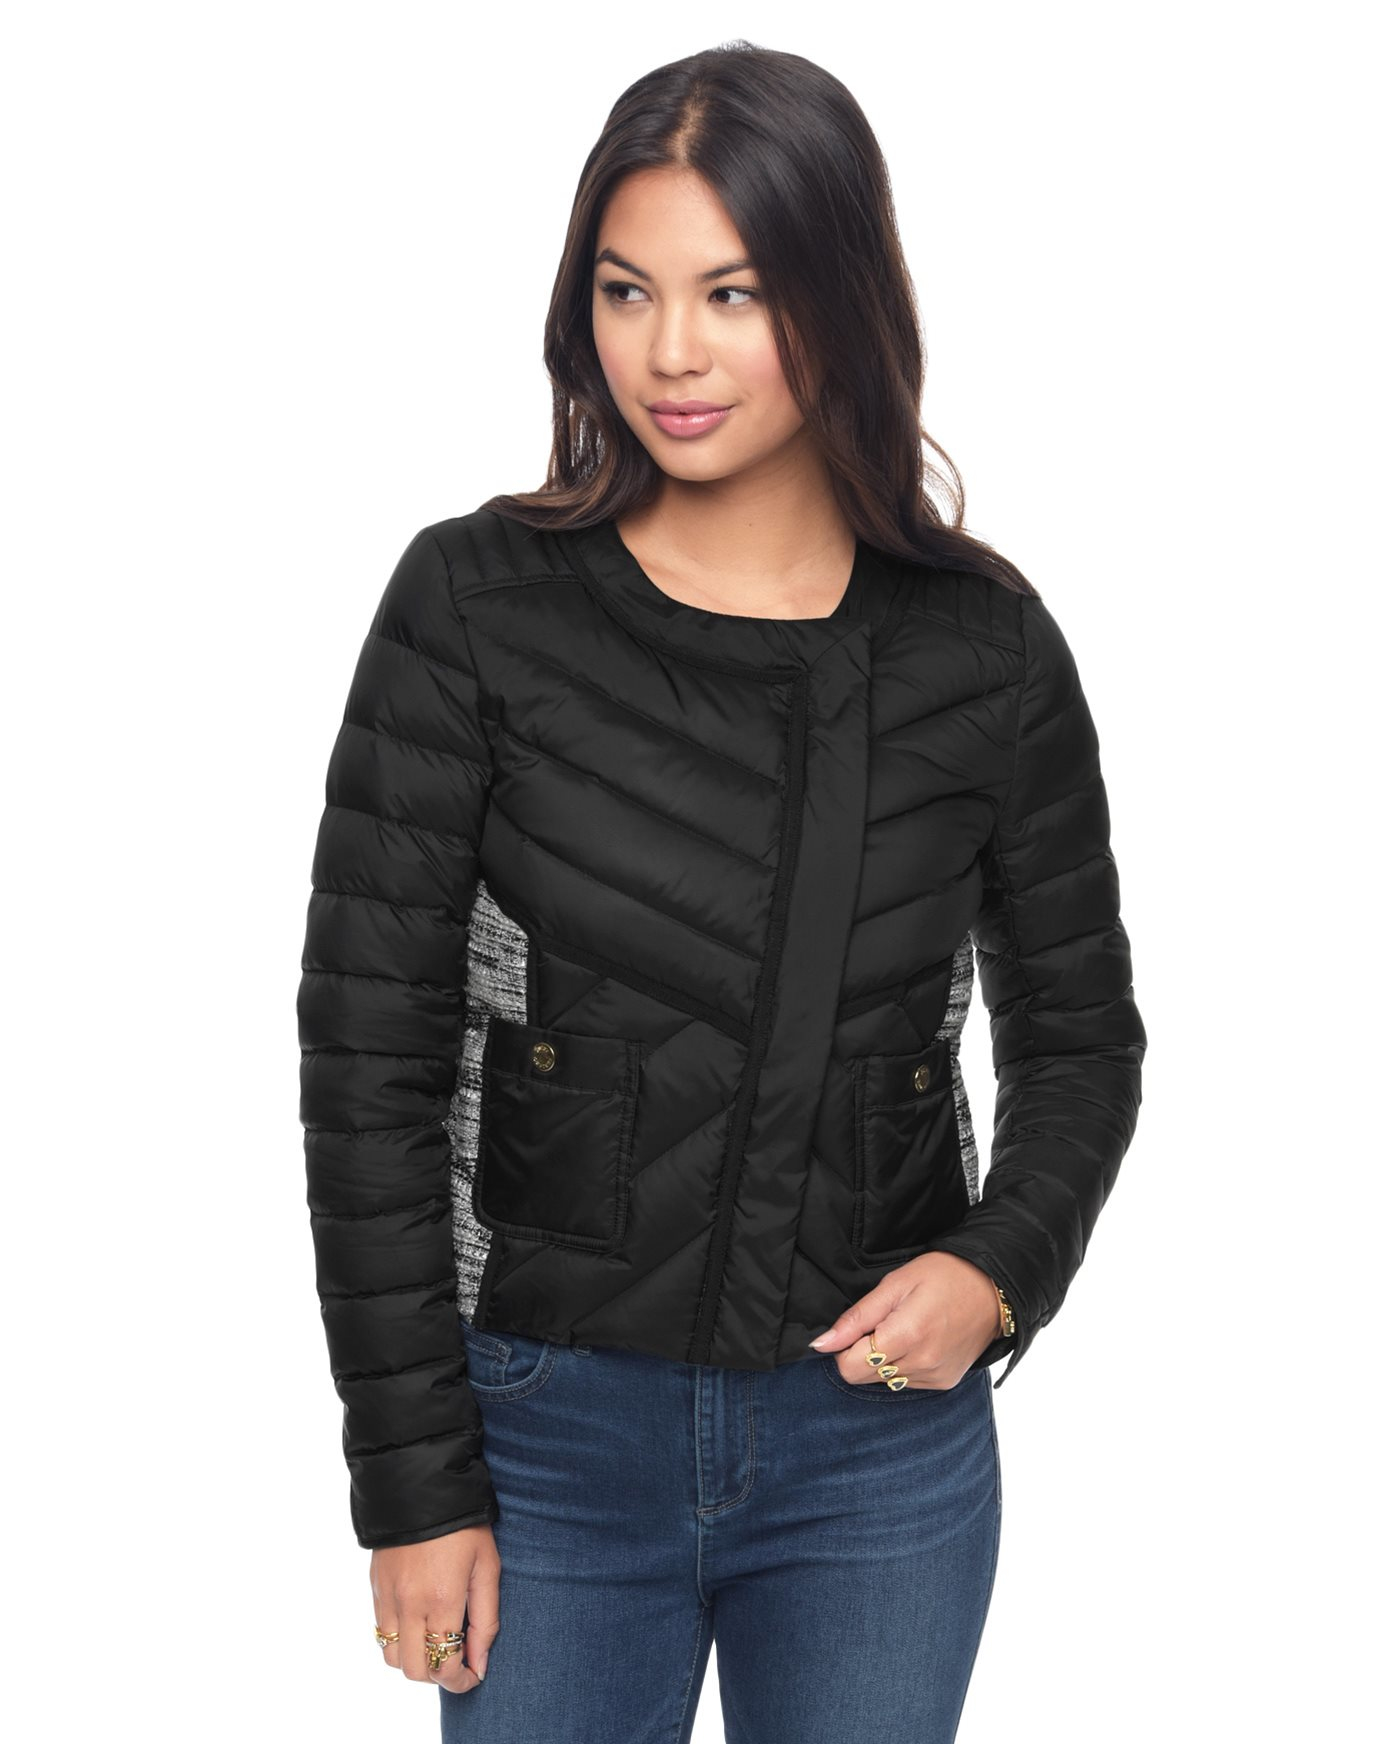 Juicy couture Ultra Light Puffer Jacket in Black (Pitch Black) - Save ...